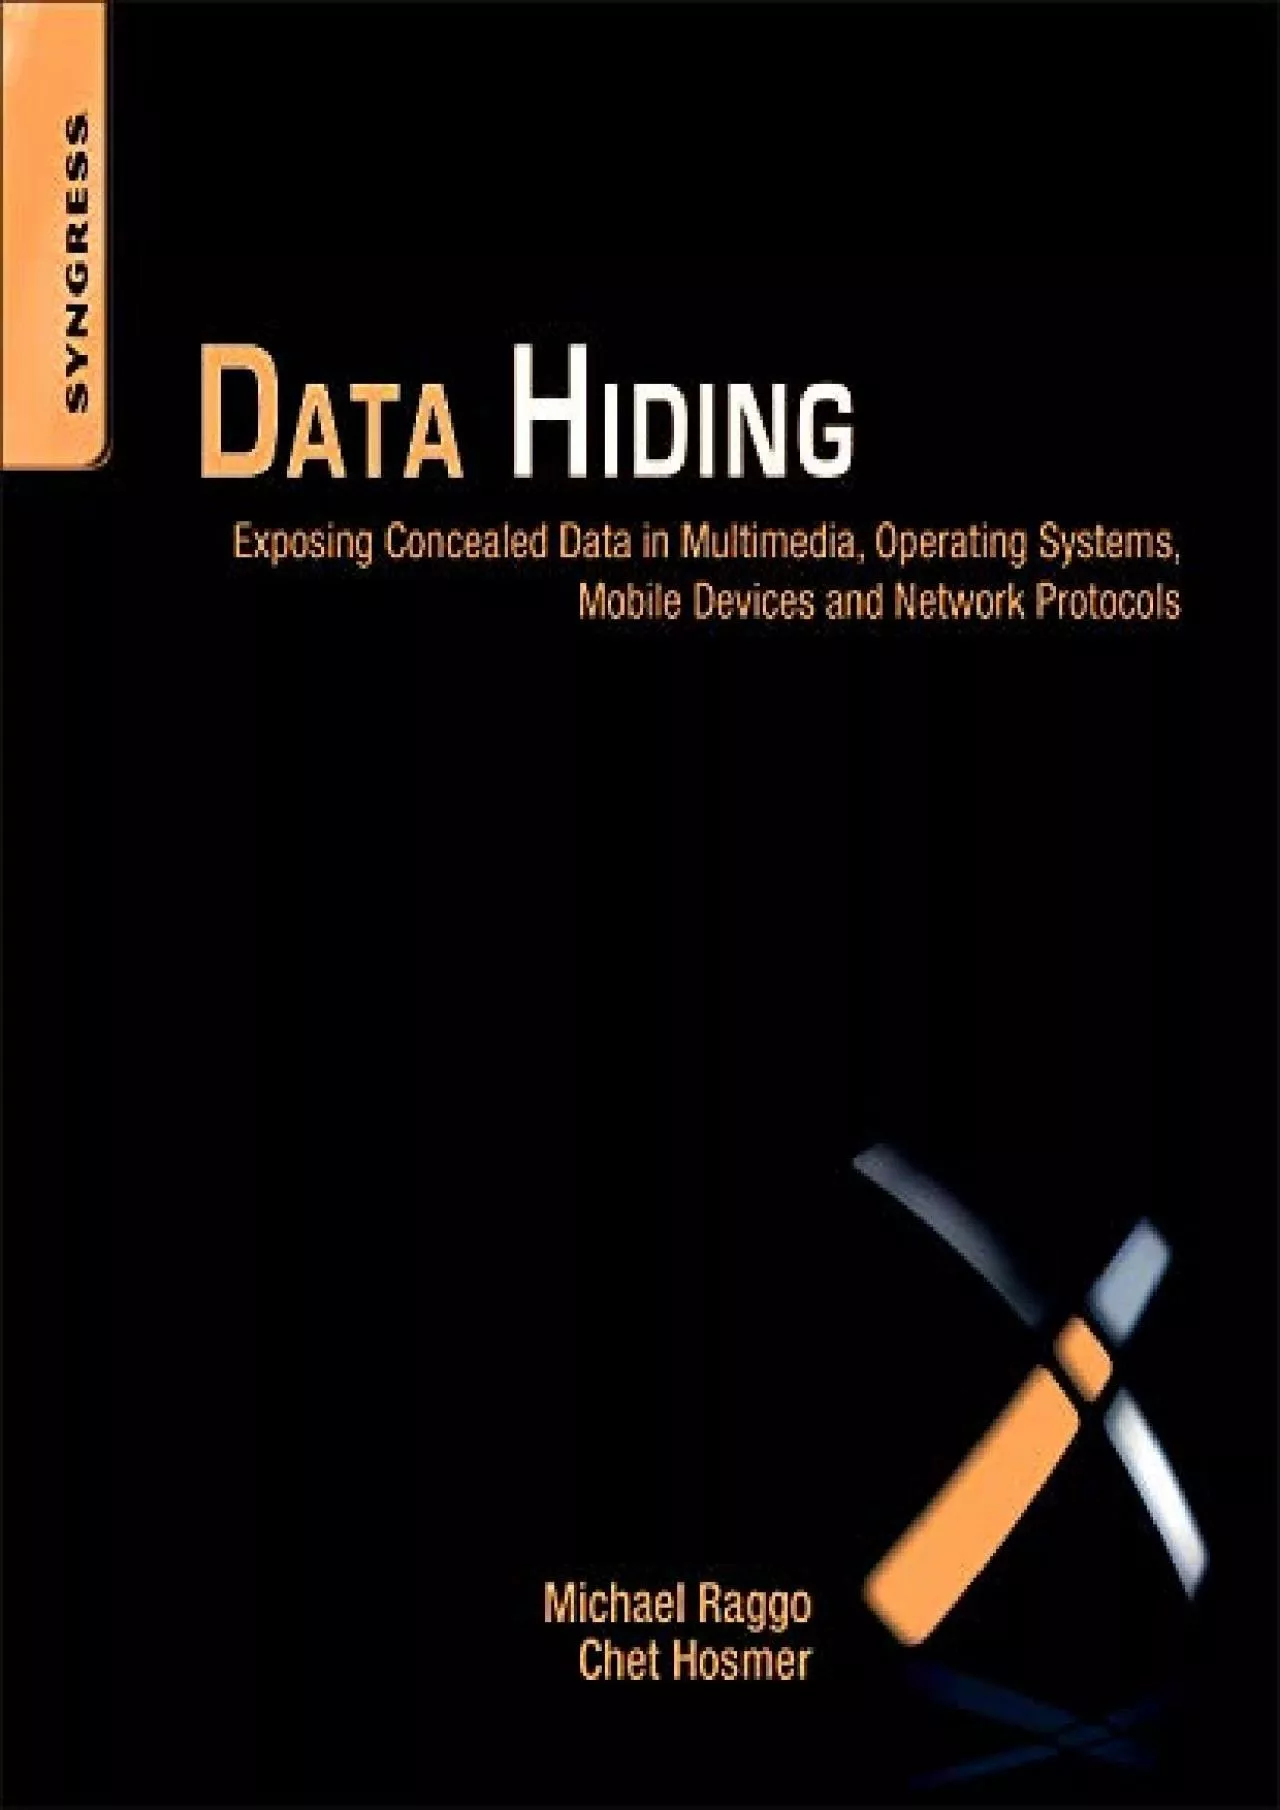 (BOOS)-Data Hiding: Exposing Concealed Data in Multimedia, Operating Systems, Mobile Devices